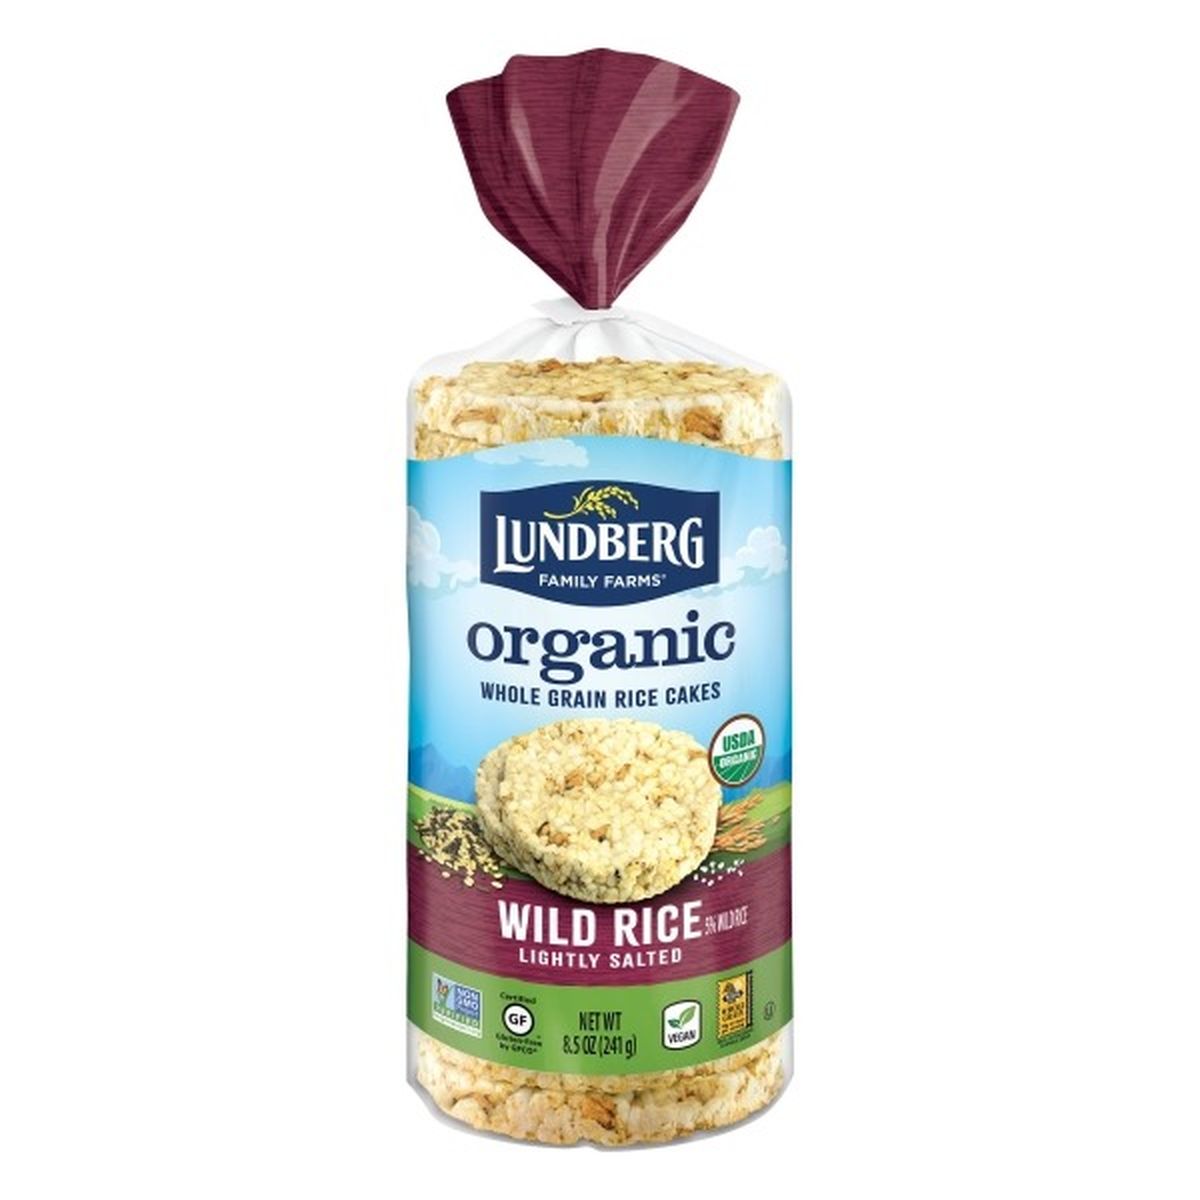 Calories in Lundberg Family Farms Rice Cakes, Whole Grain, Organic, Lightly Salted, Wild Rice